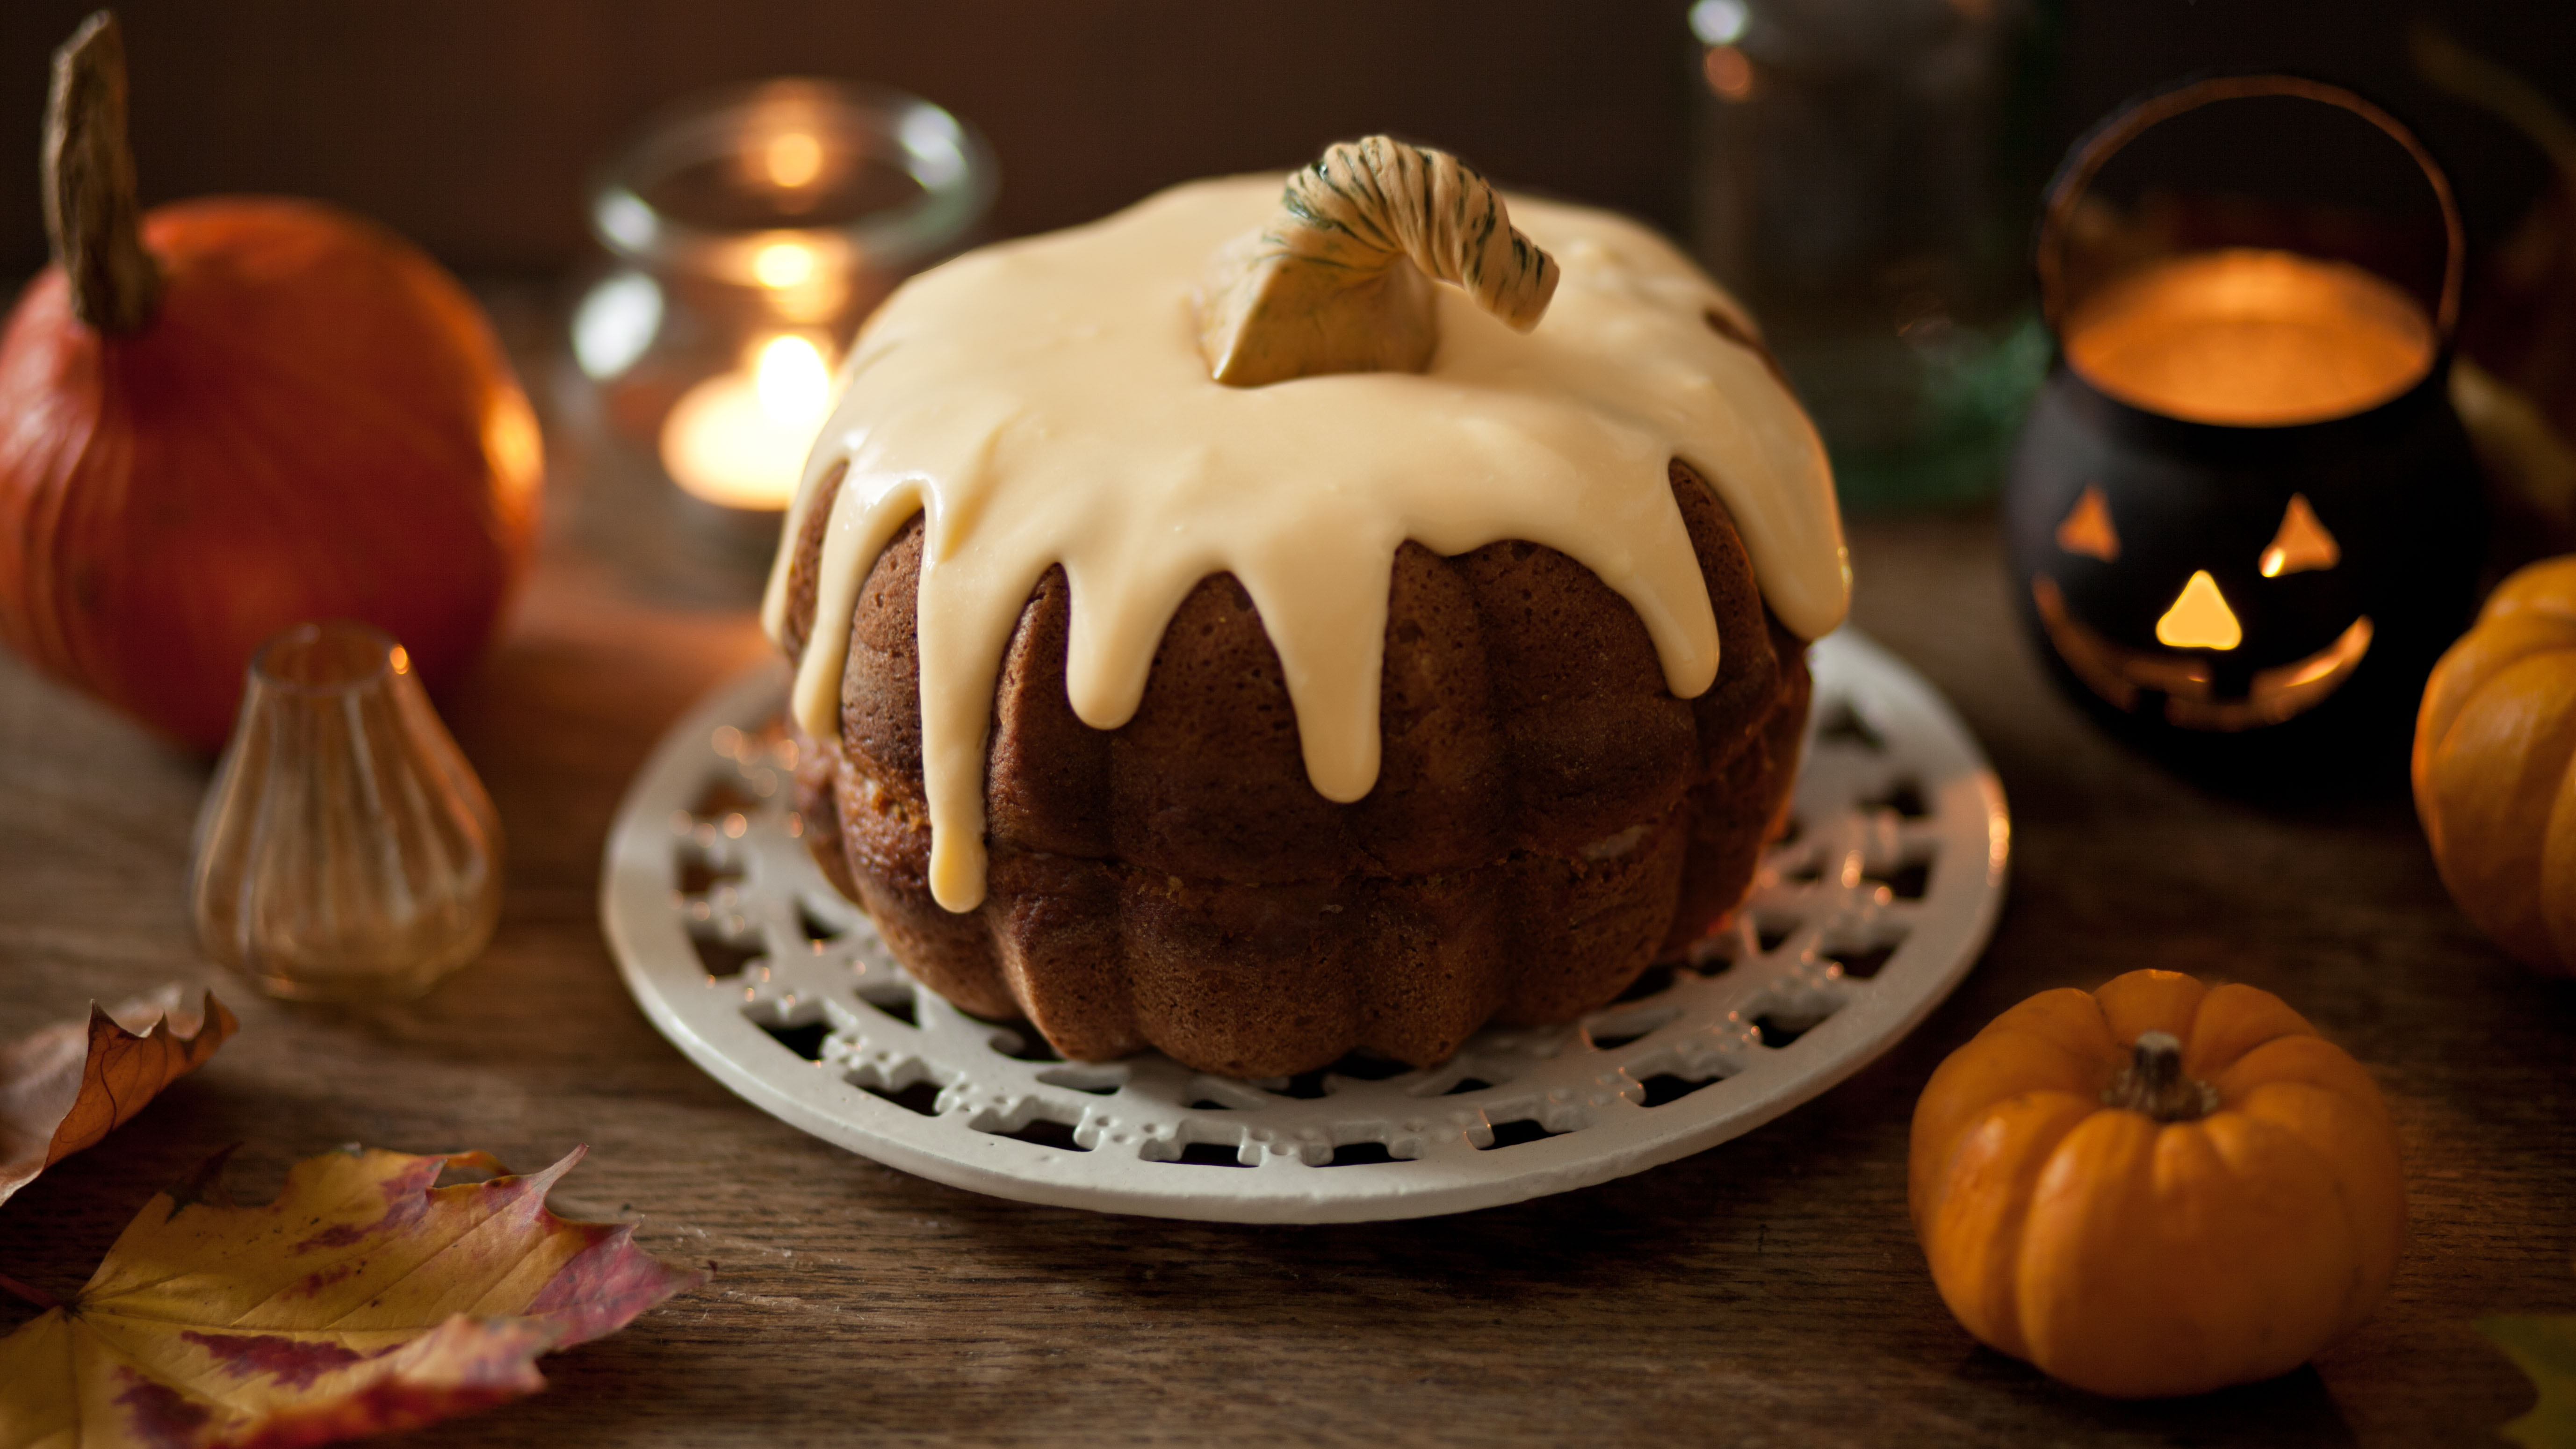 2 Ingredient Pumpkin Cake - The How-To Home